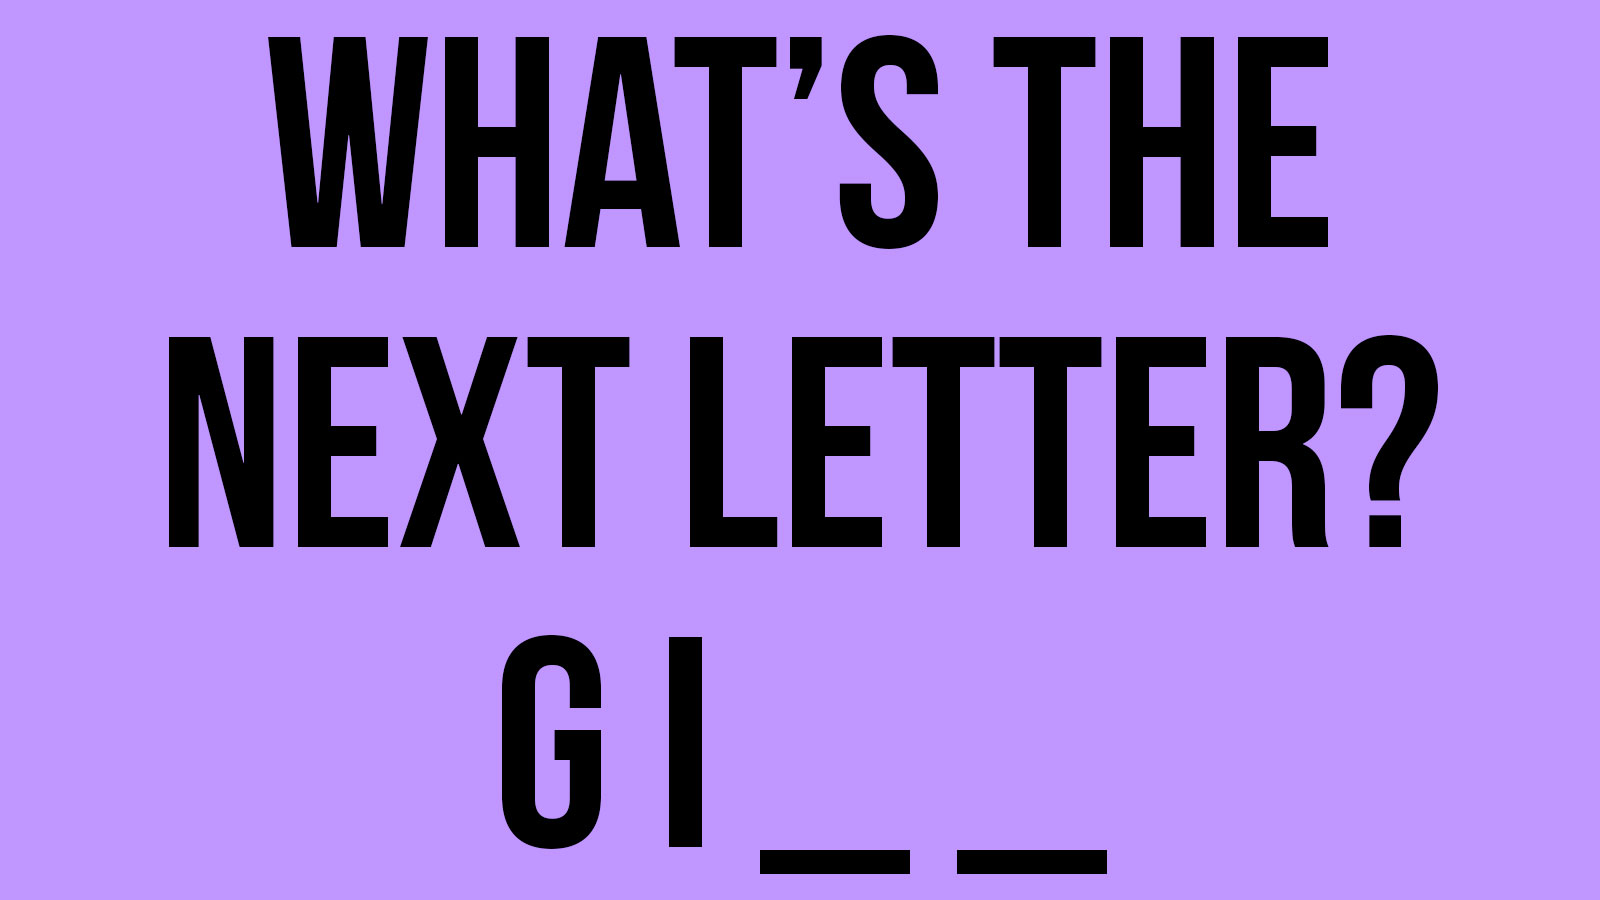 Can You Guess and Spell the Words in This Quiz? 32